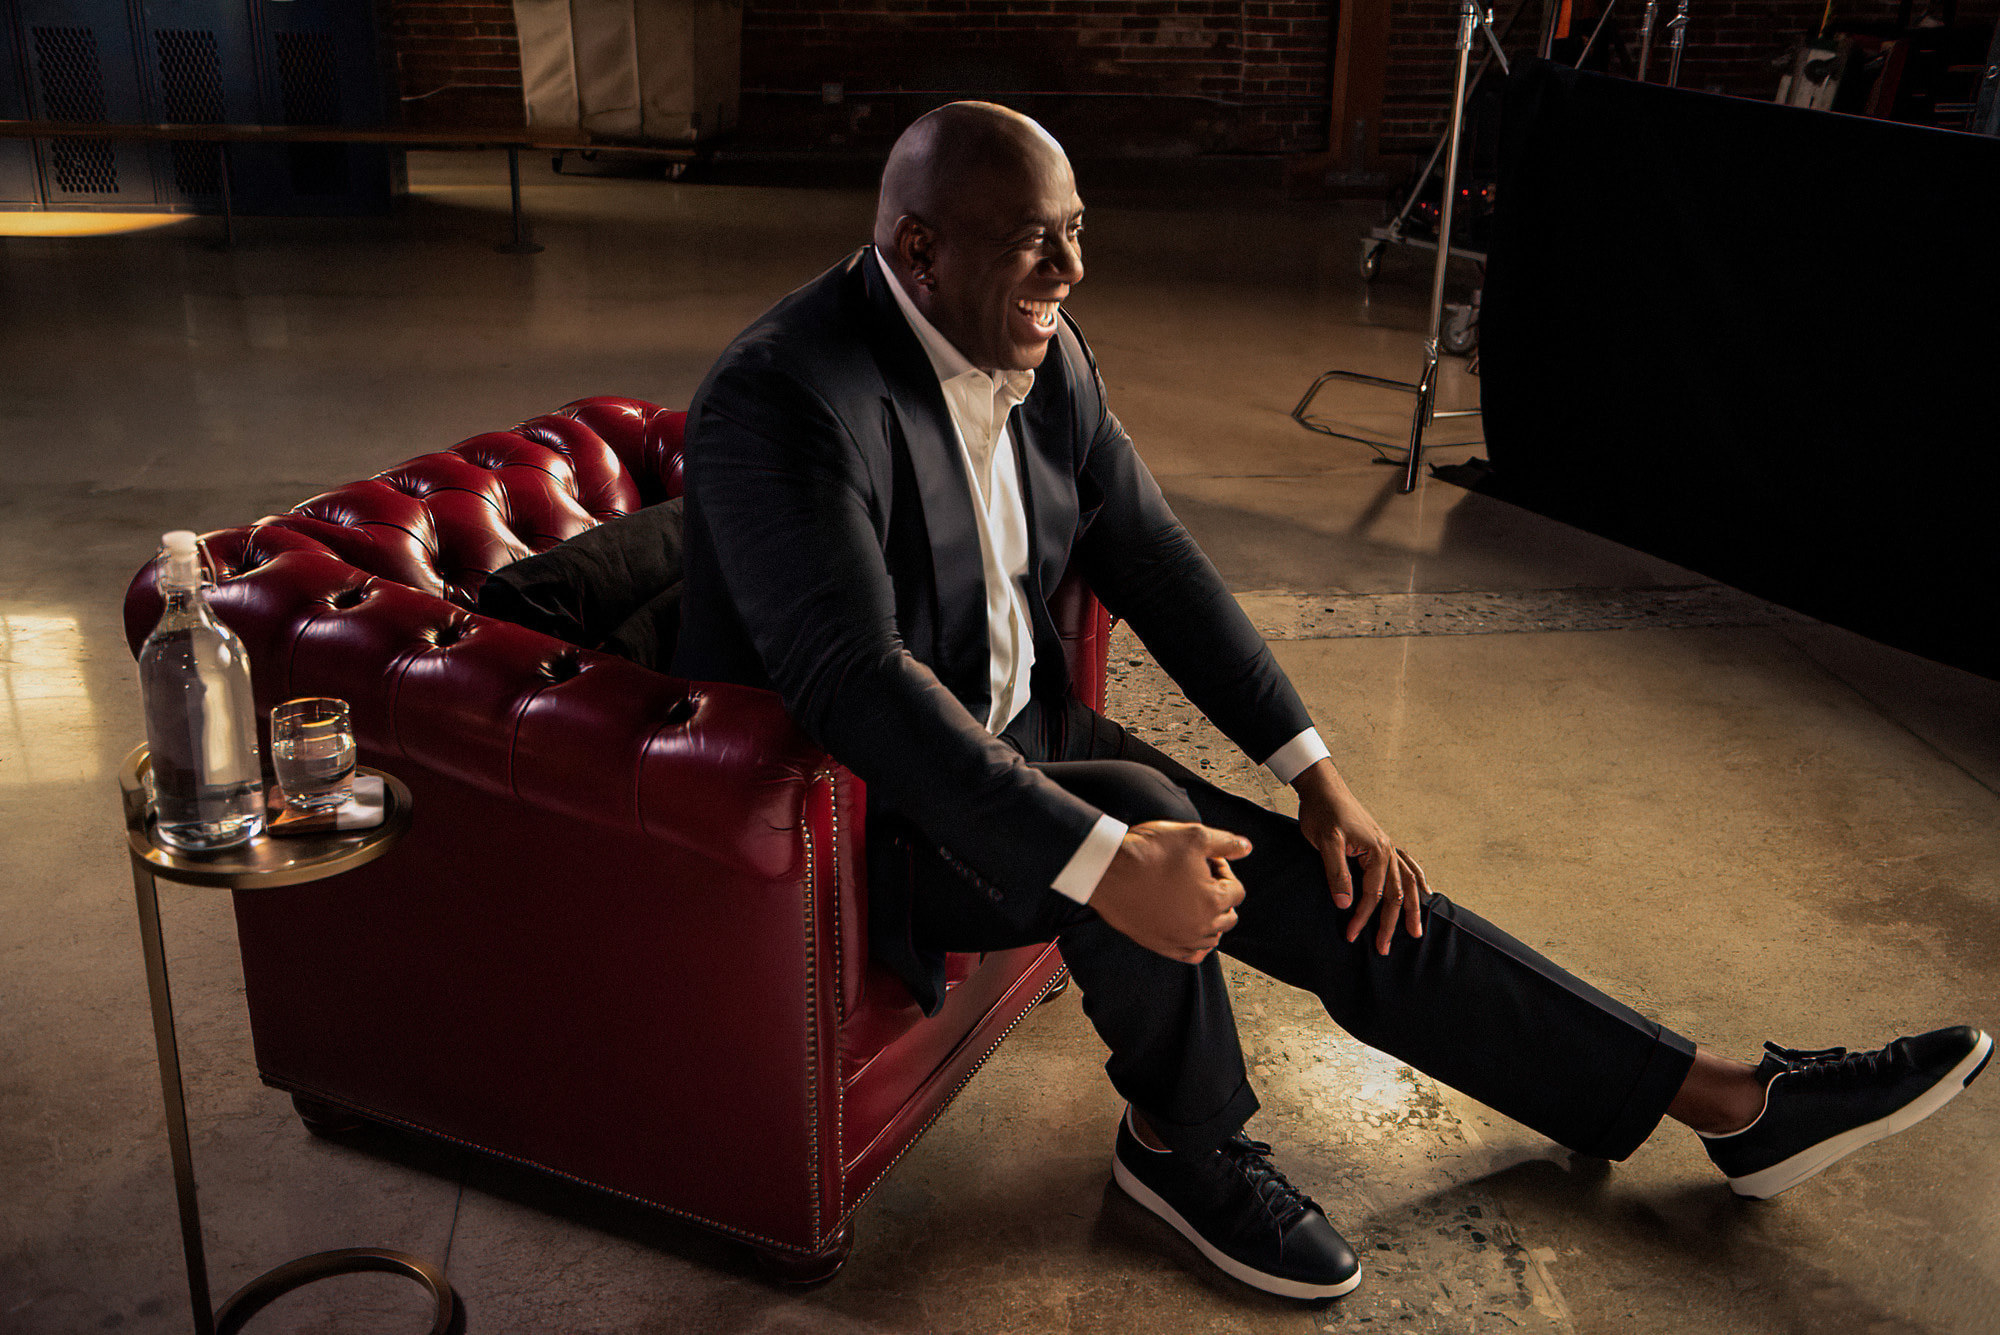 Magic Johnson sits in a red chair